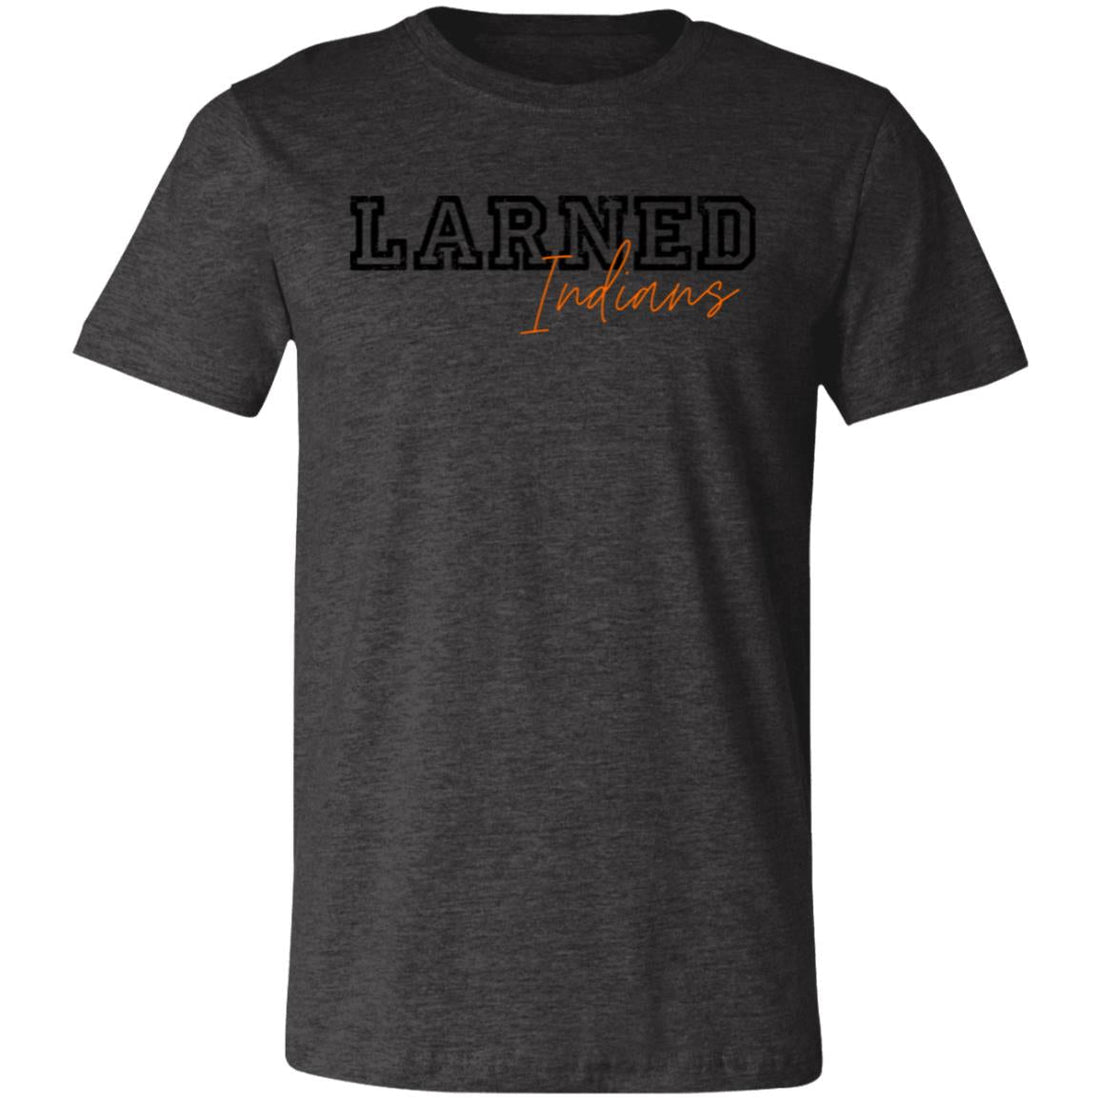 Larned Indians T-Shirt - T-Shirts - Positively Sassy - Larned Indians T-Shirt